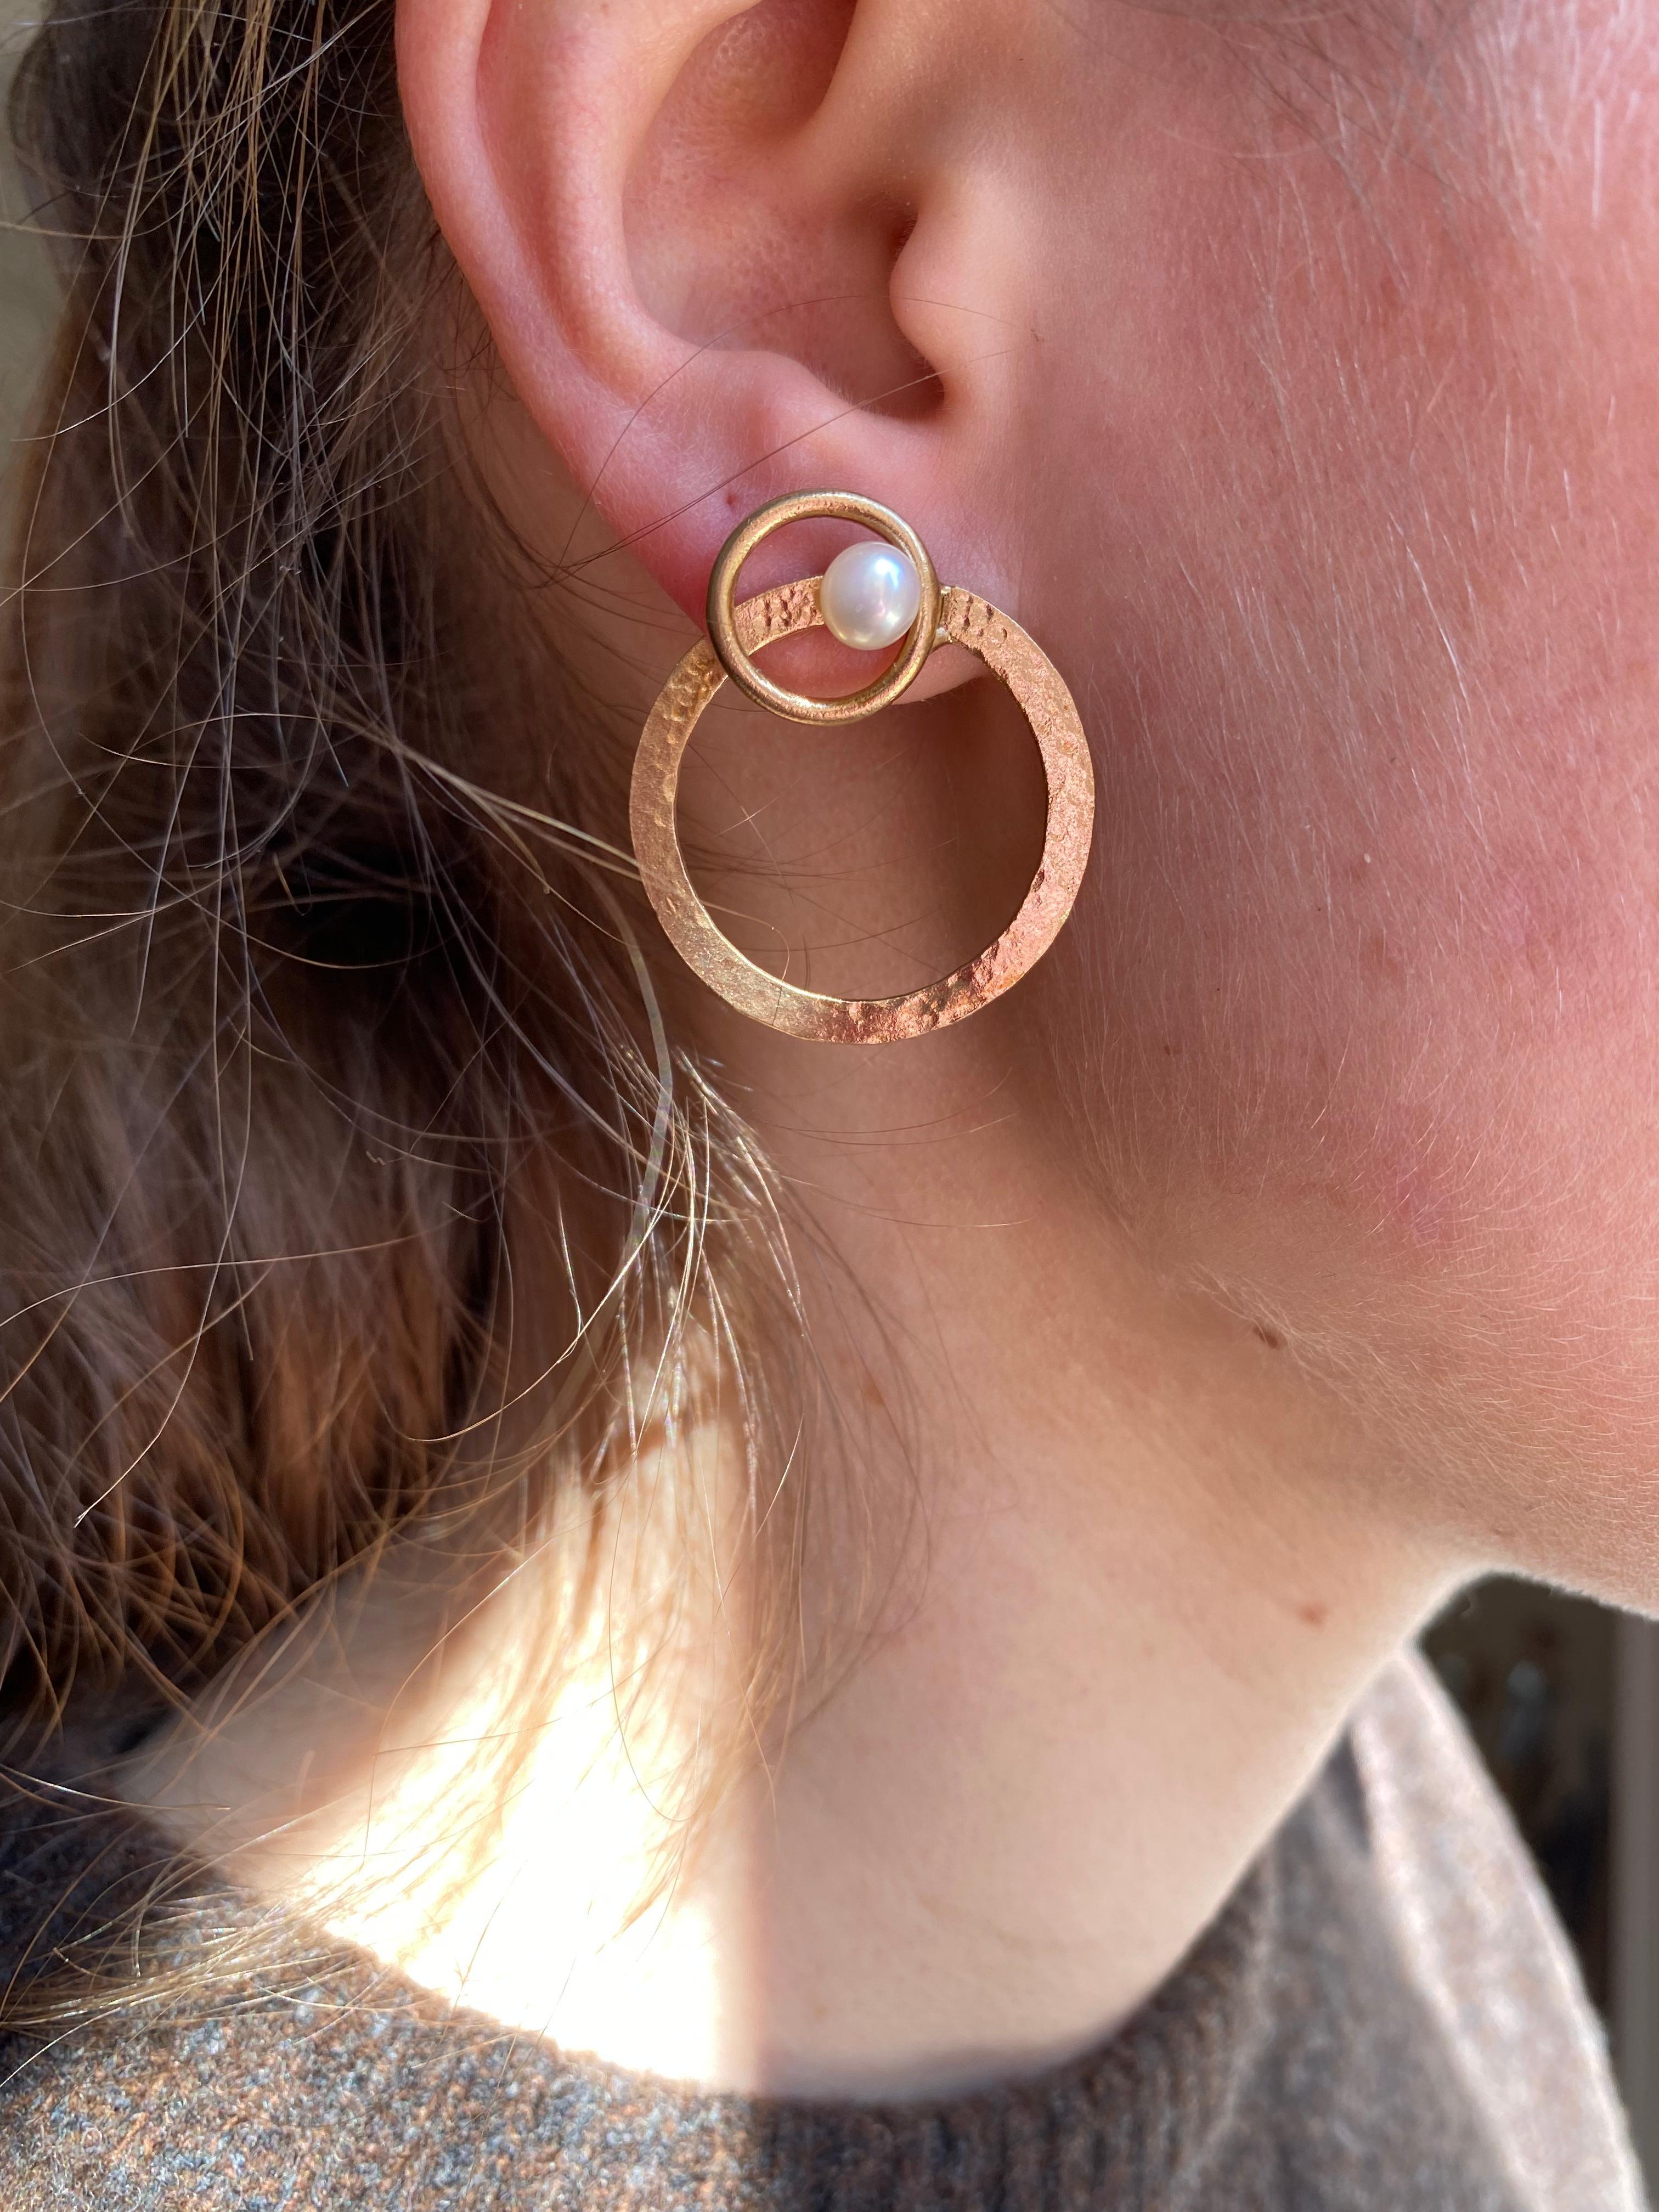 Introducing the Rossella Ugolini Design Collection, we present the Hammered 18 Karats Yellow Gold Open Hoop Circle Artisan Modern Earrings. Handcrafted with care, these earrings feature a stunning white pearl nestled within the intricate design. The